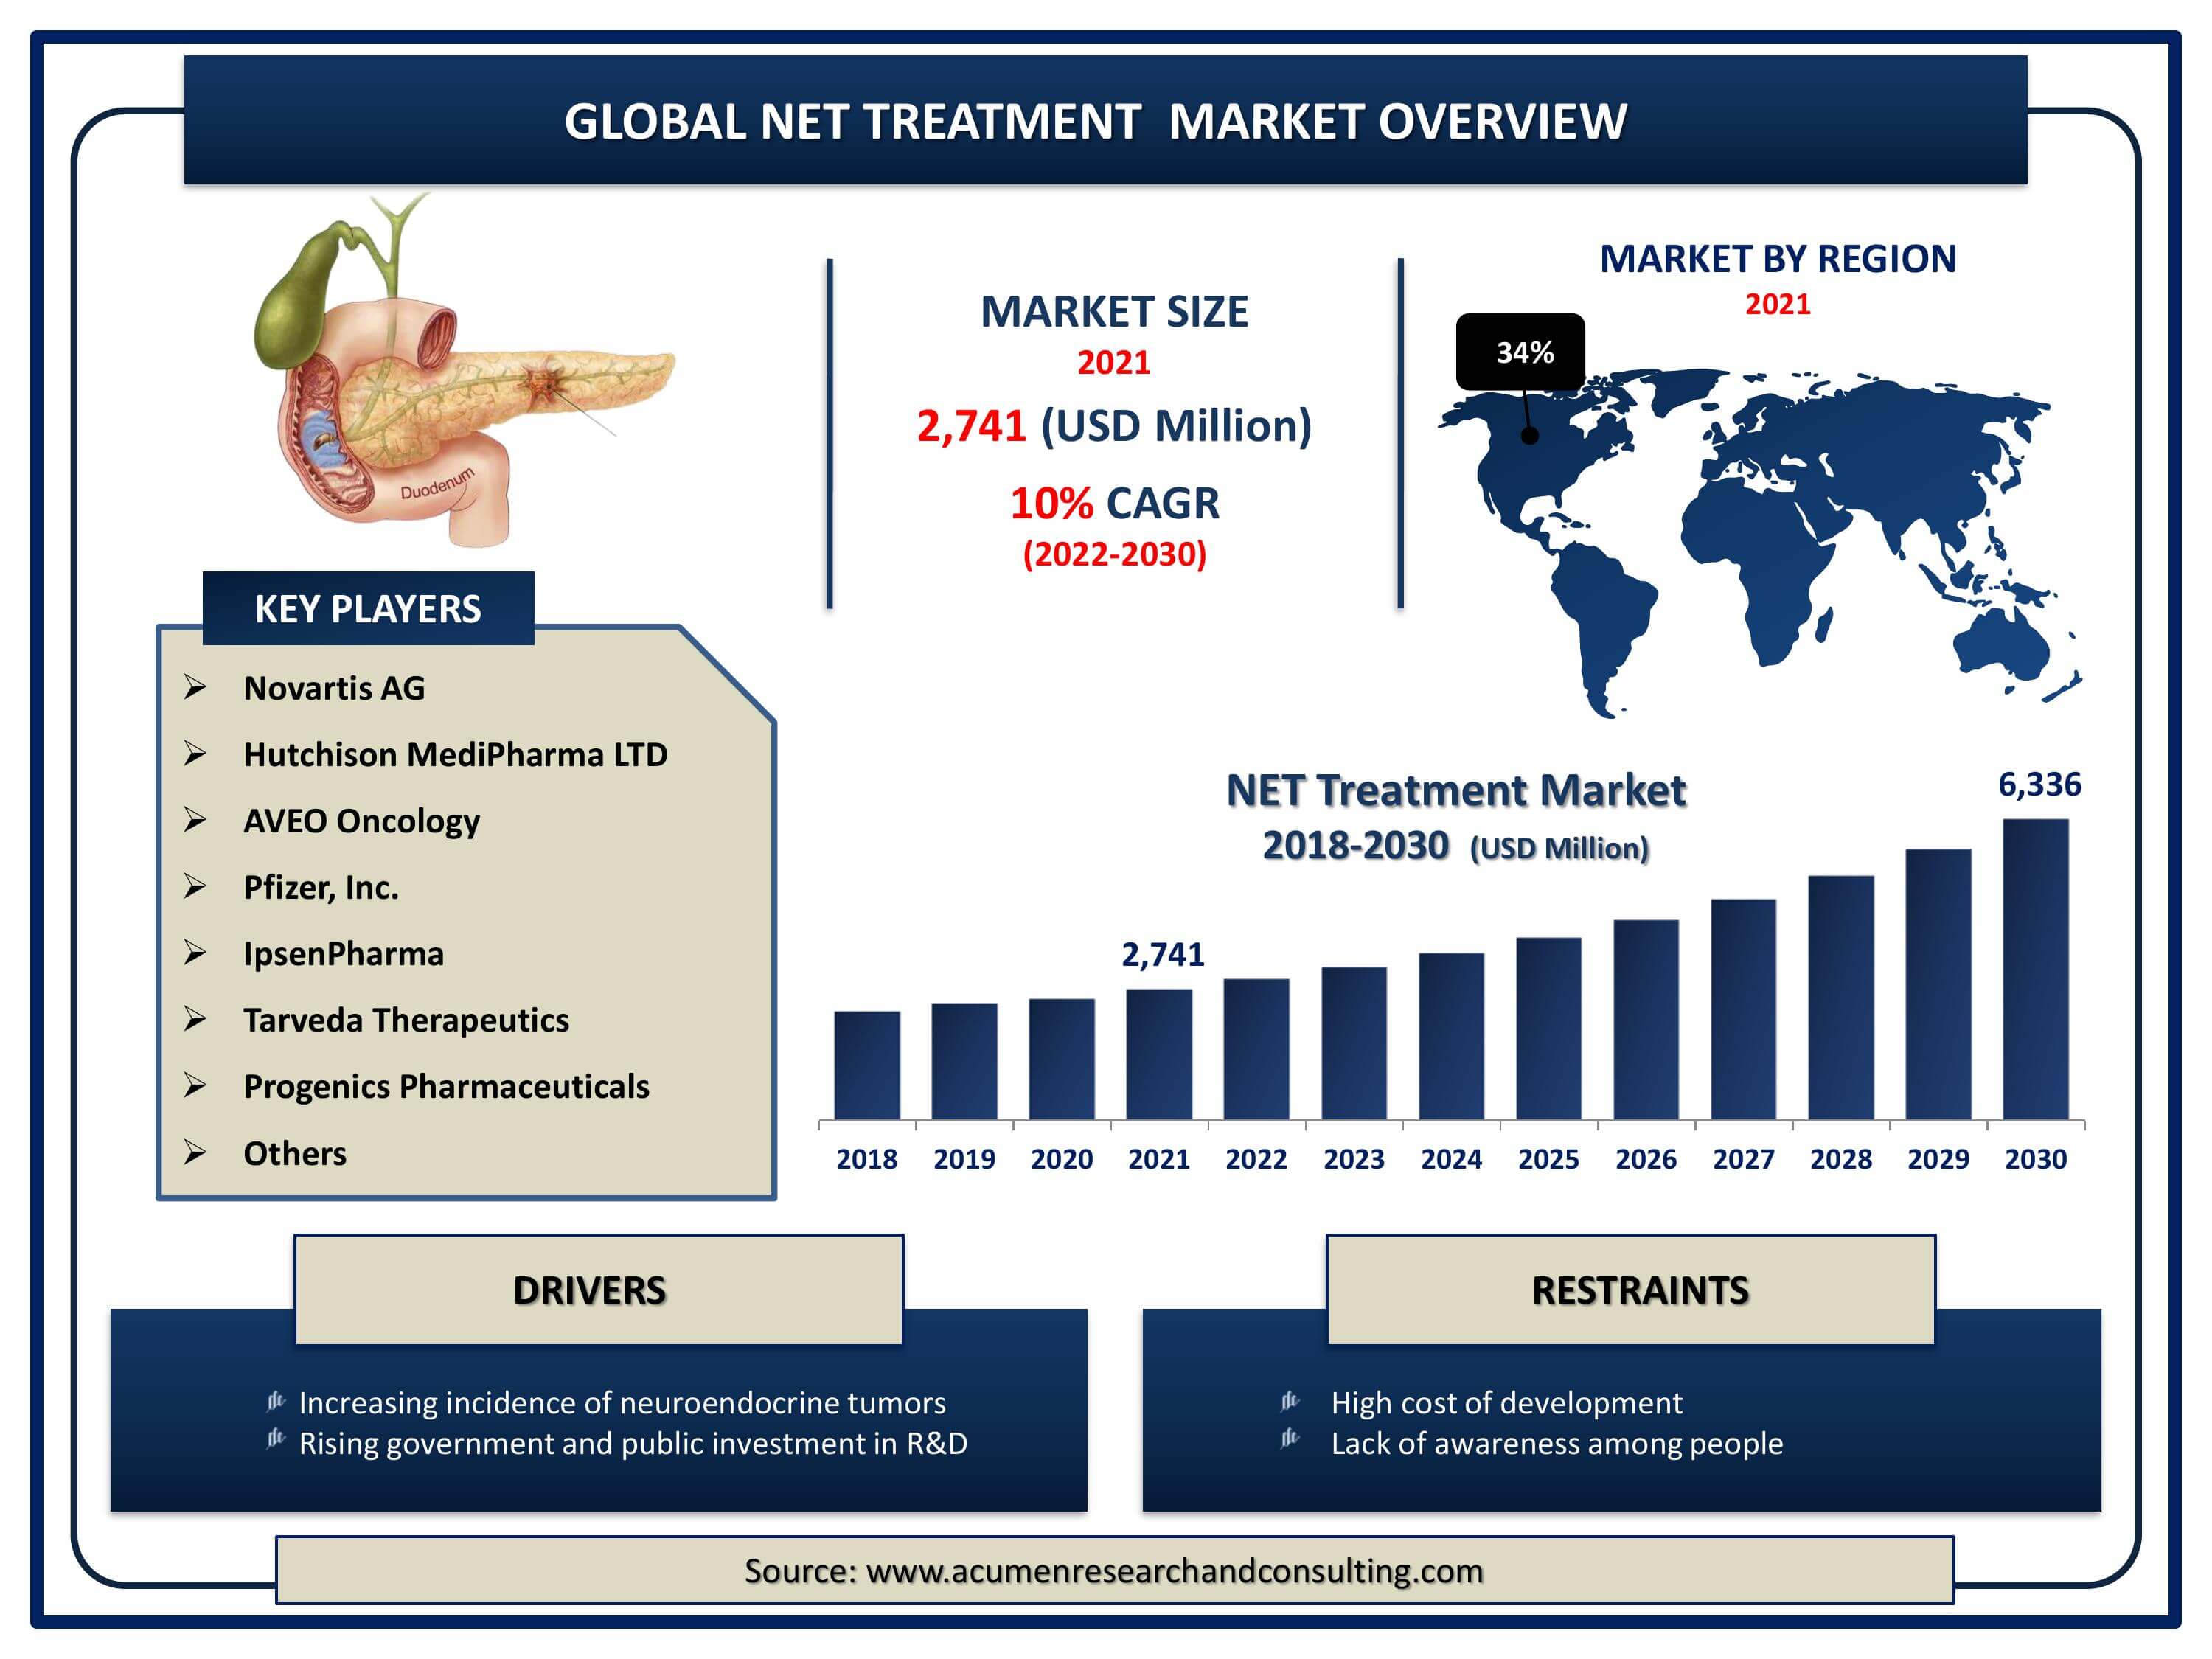 Global Neuroendocrine tumors NET treatment market revenue is expected to increase by USD 6,336 million by 2030, with a 10% CAGR from 2022 to 2030.